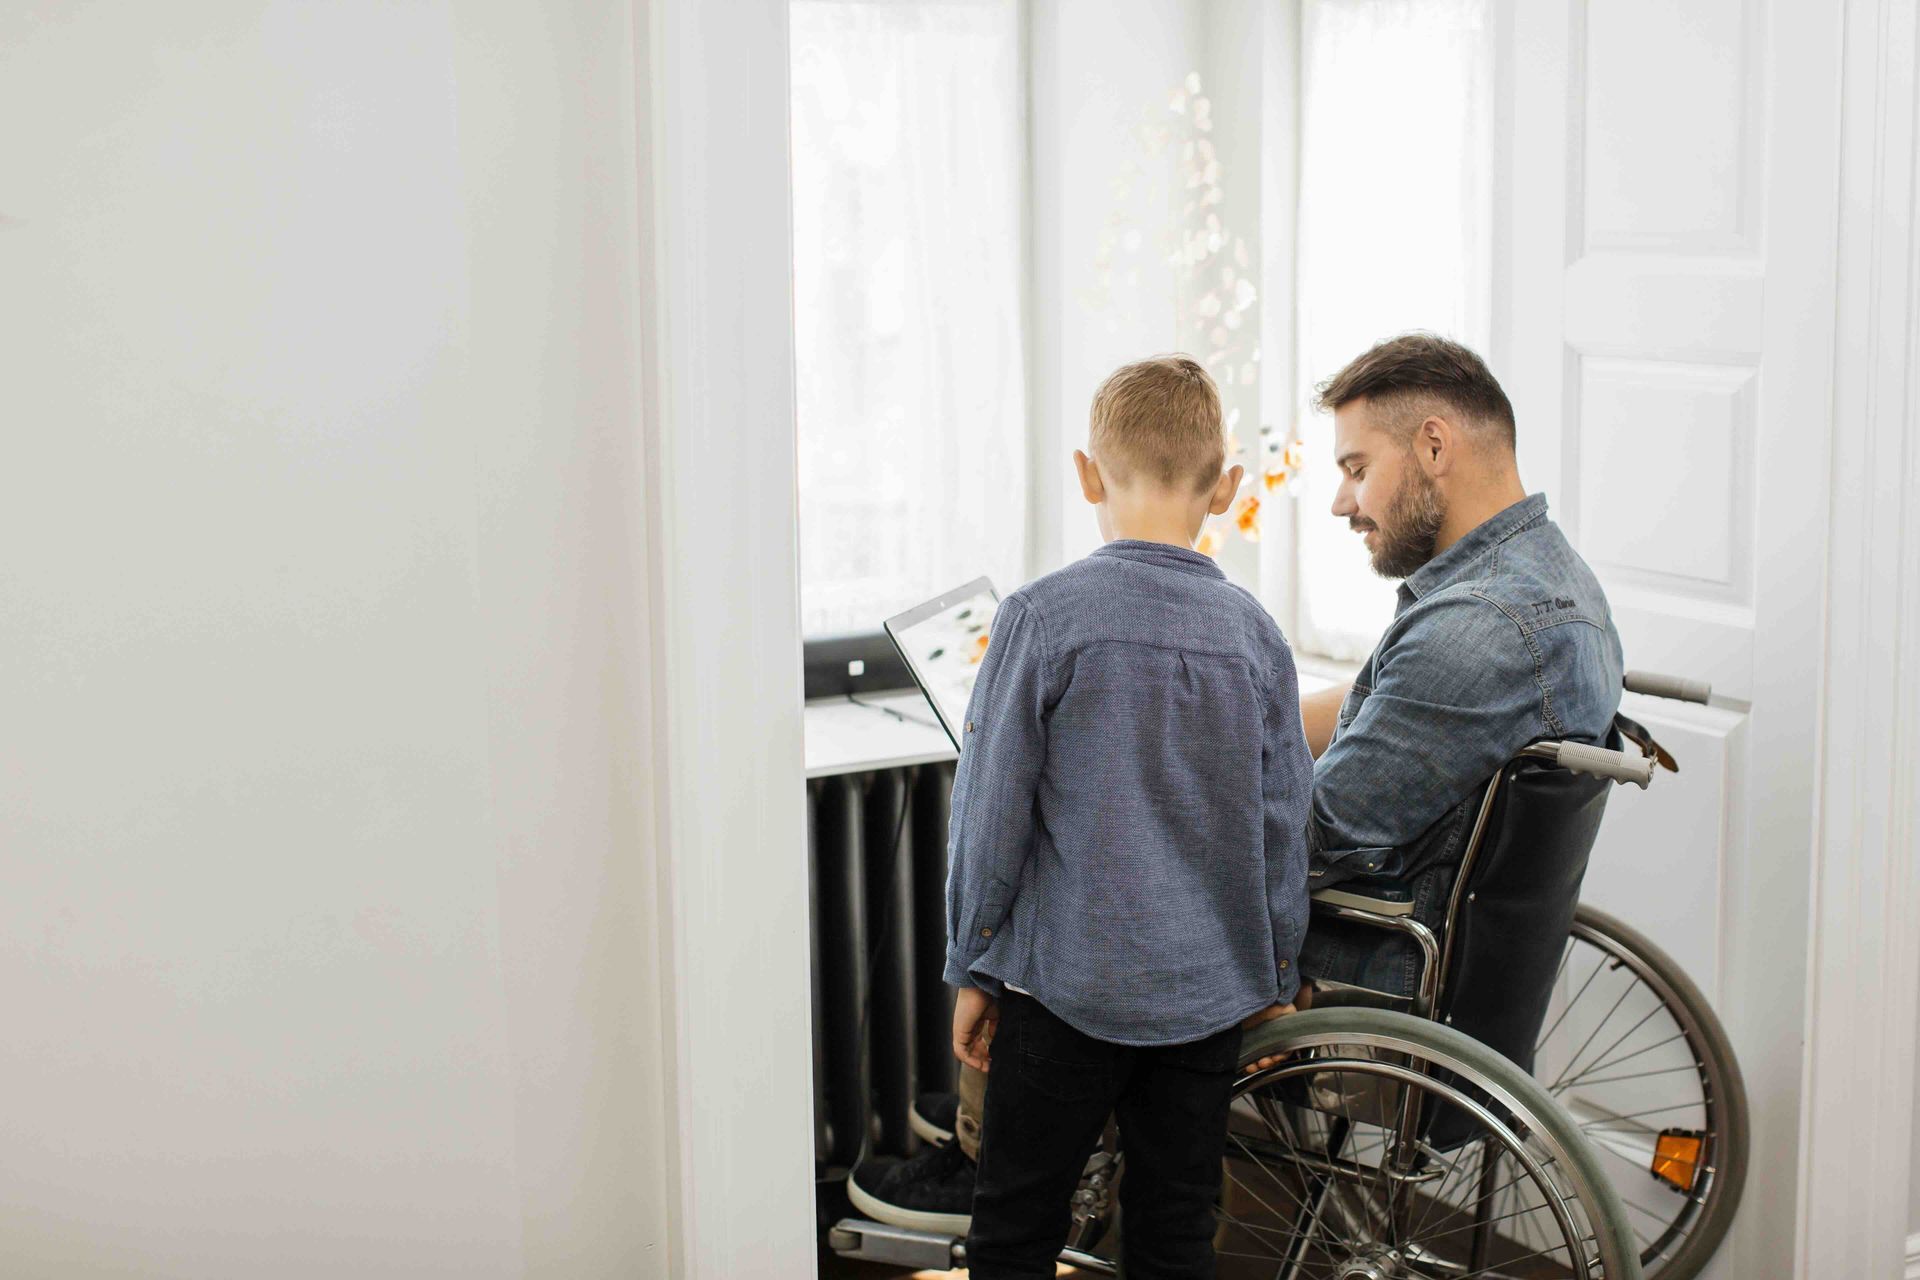 A man in a wheelchair is looking at a laptop with a boy standing next to him.